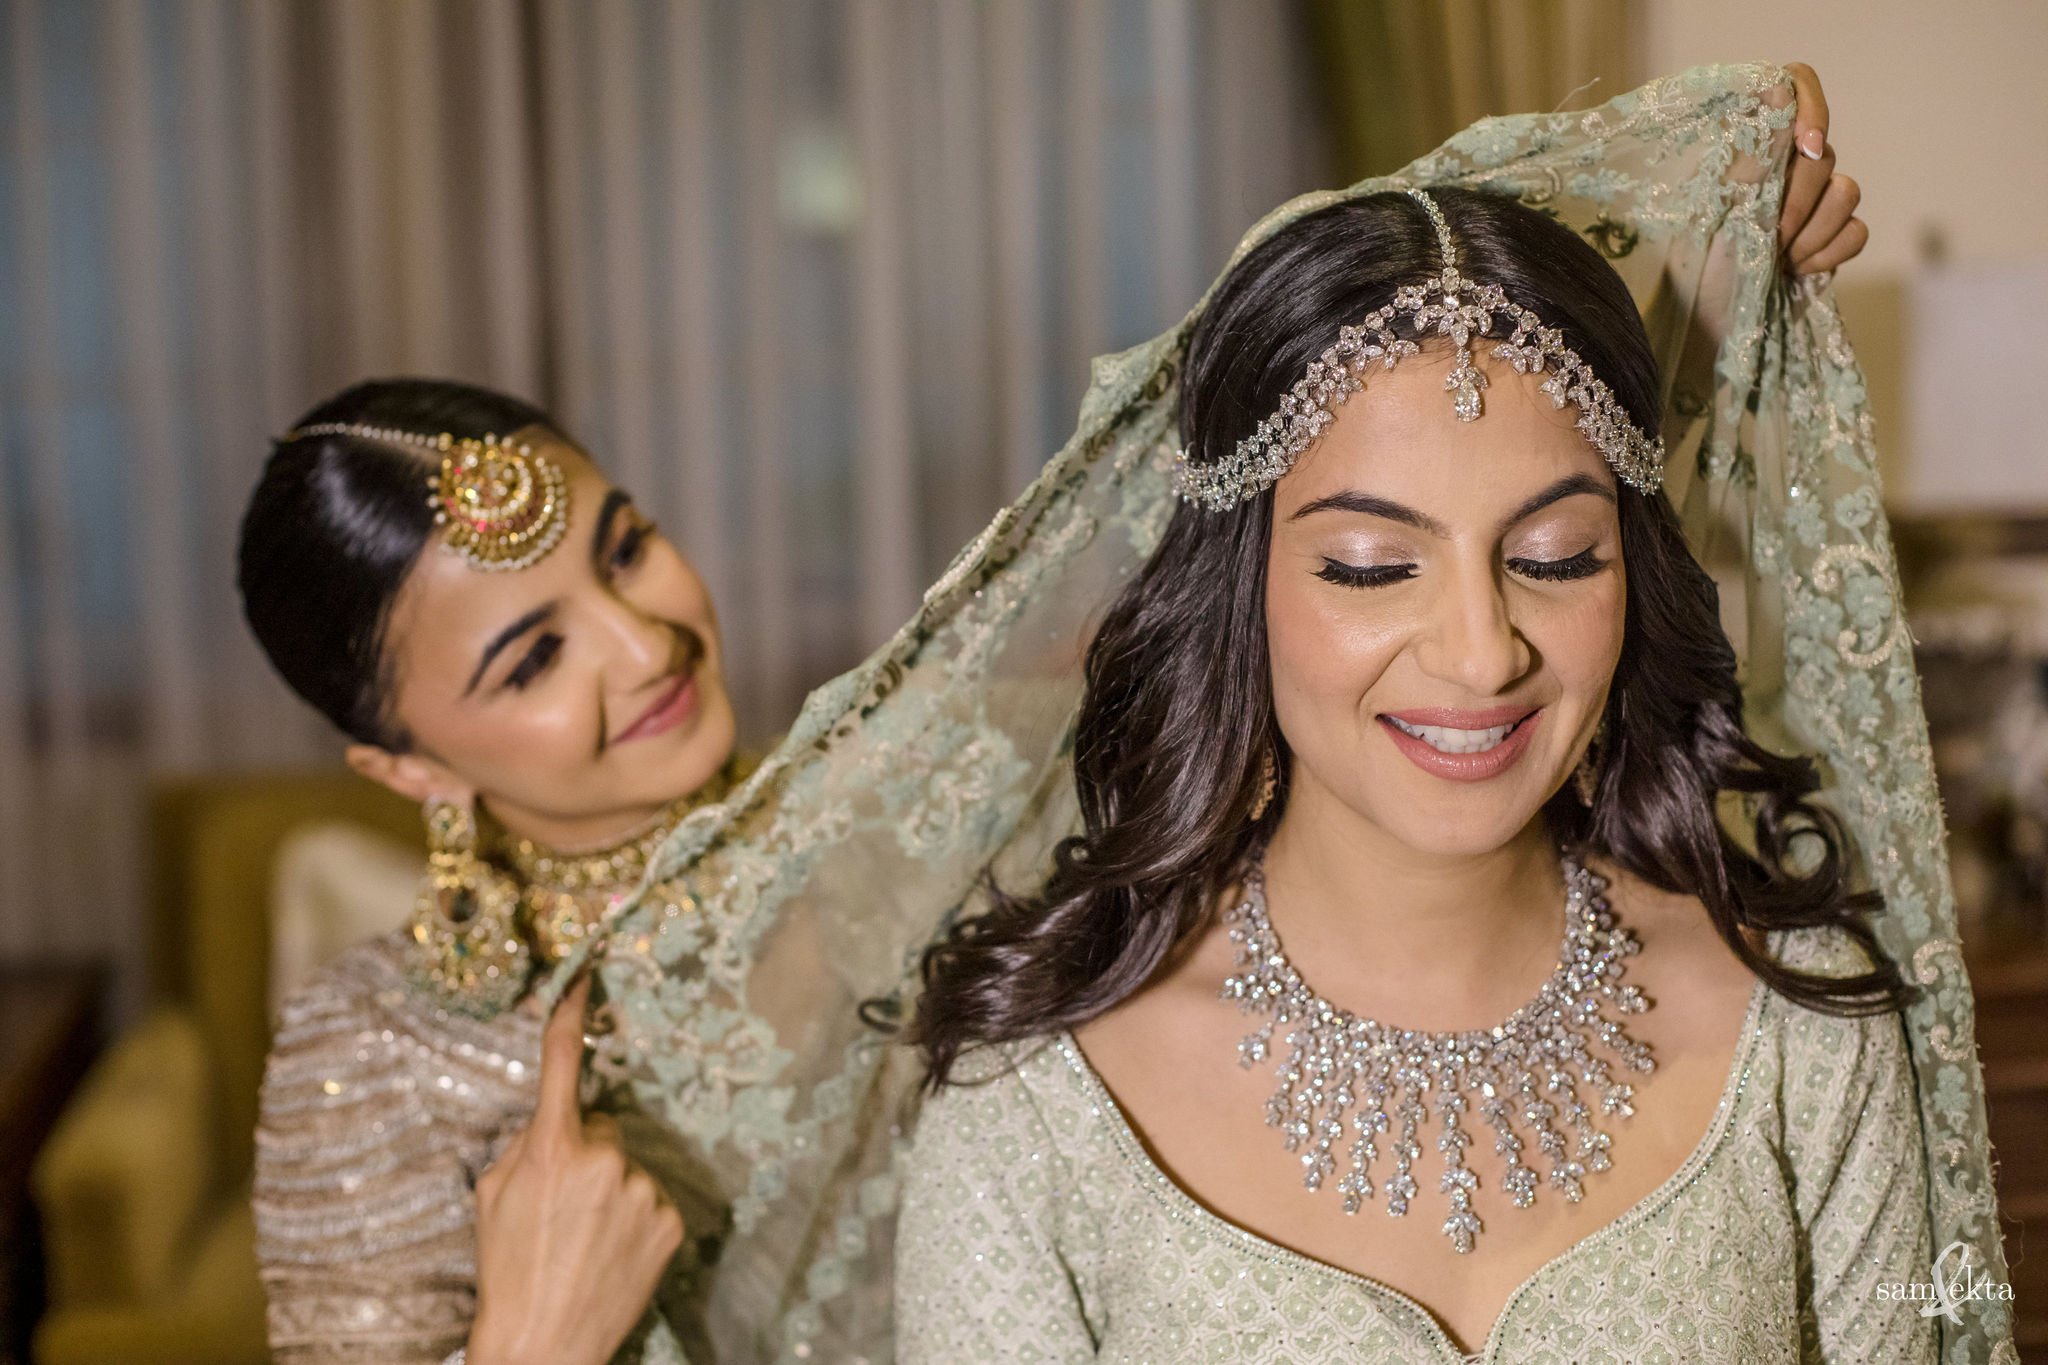 Nikita helped put the final touches on Saba as she transformed into a bride